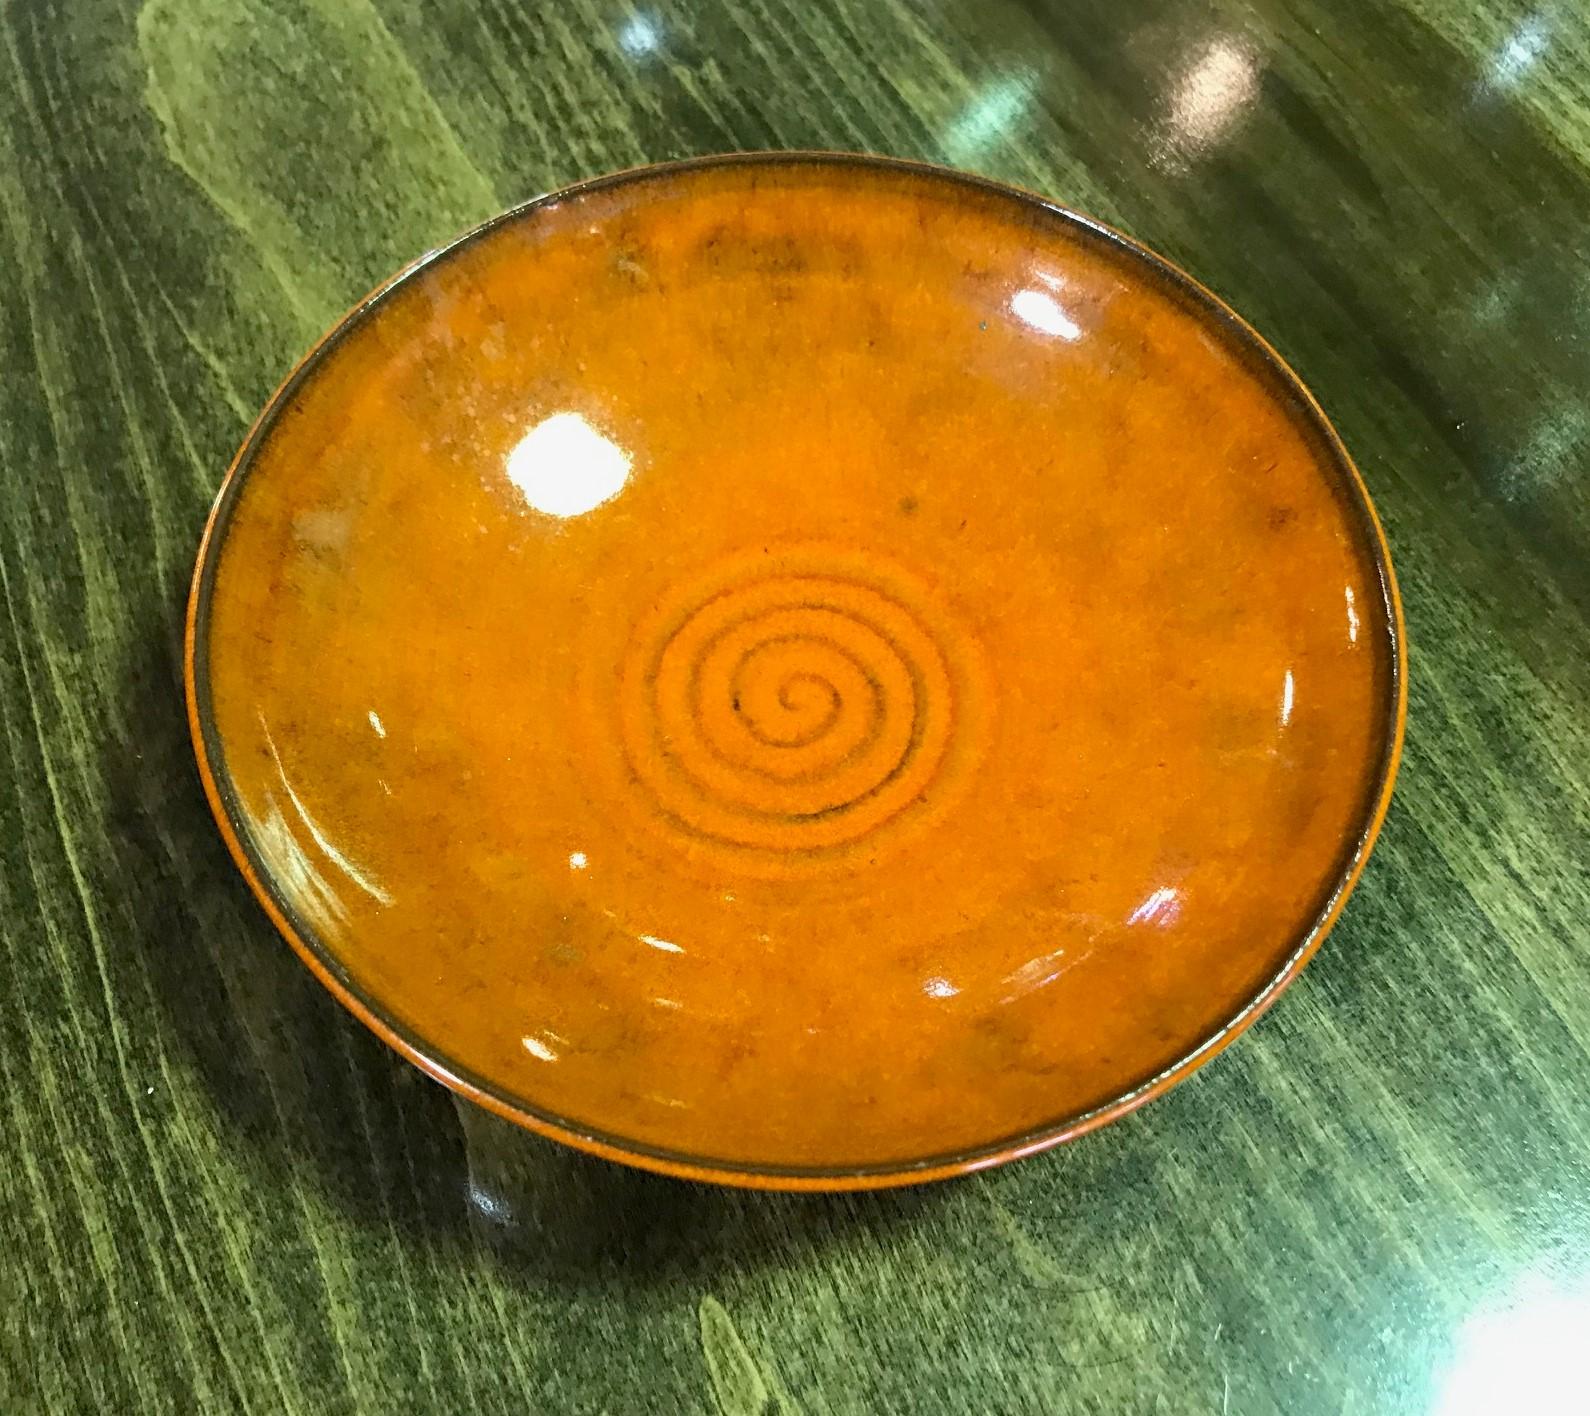 A fantastic, wonderfully glazed bowl by renowned American potter Laura Andreson. Gorgeous in design and color featuring her highly coveted red glaze. 

Signed and dated (1951) on the base by Andreson.

Would be a great addition to any midcentury